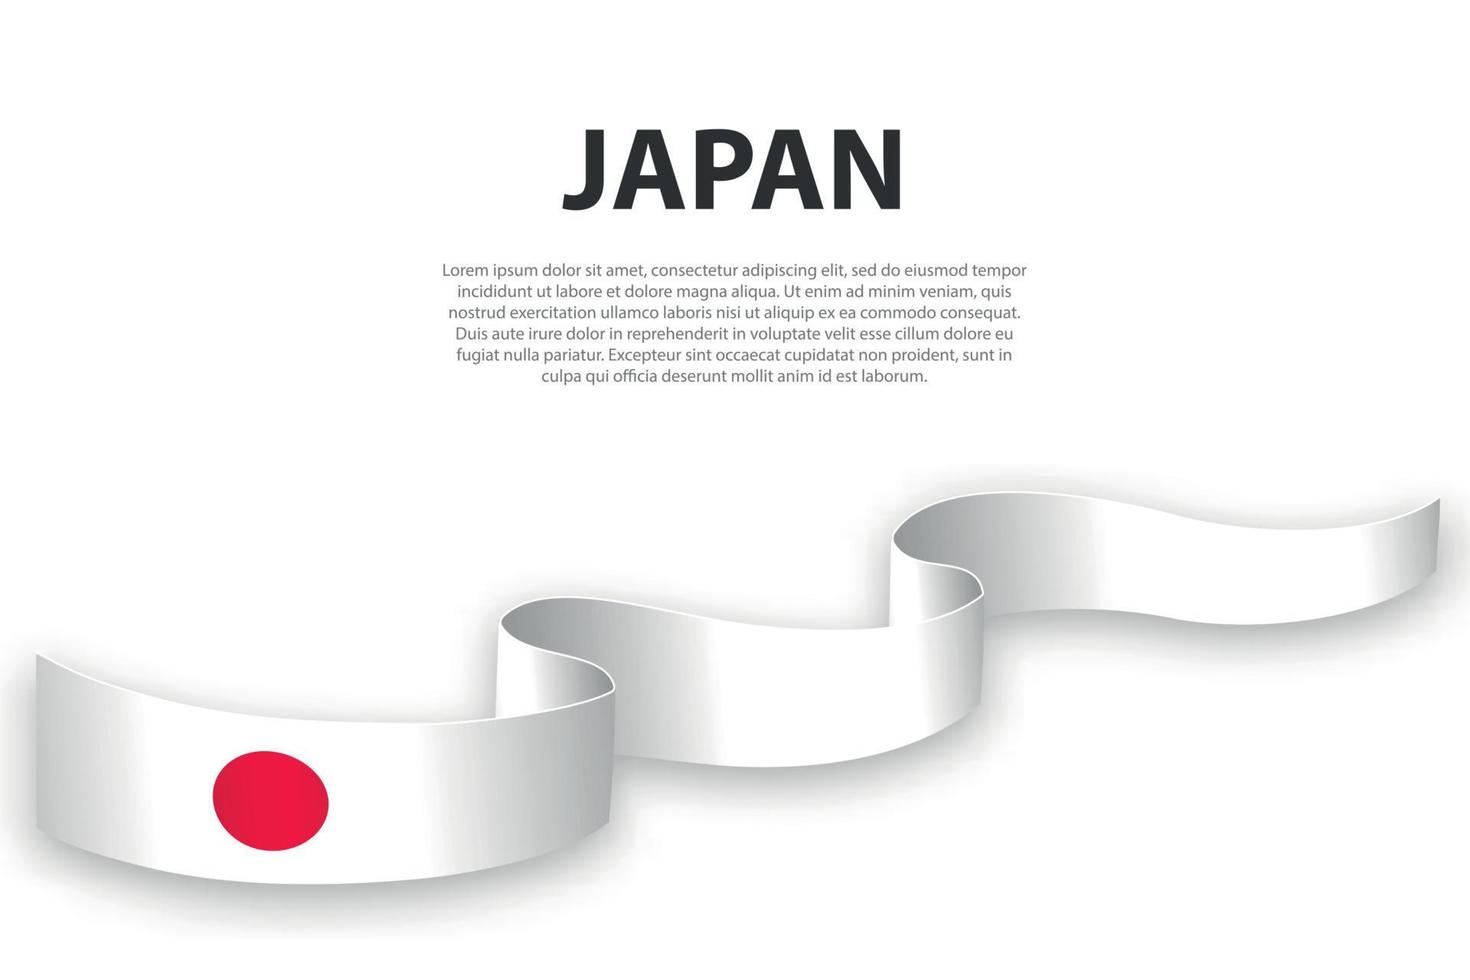 Waving ribbon or banner with flag of Japan vector